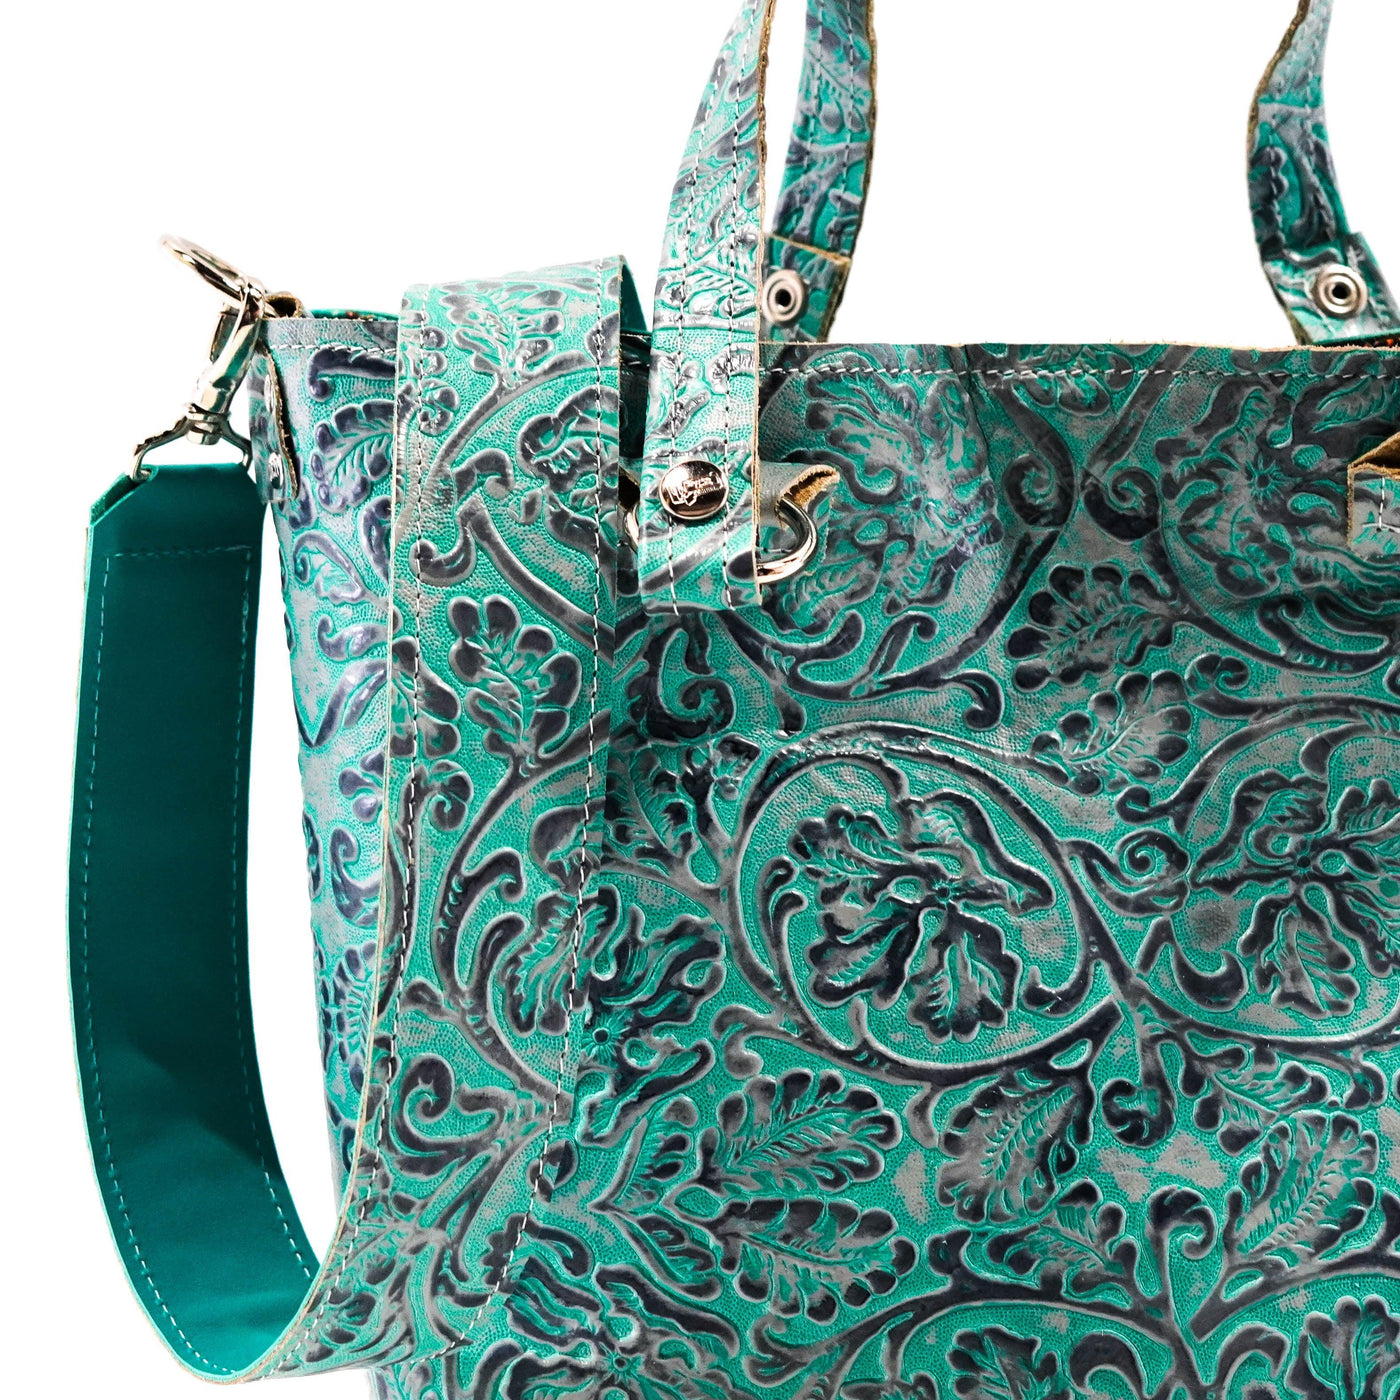 Taylor - All Embossed w/ Royston Tool-Taylor-Western-Cowhide-Bags-Handmade-Products-Gifts-Dancing Cactus Designs